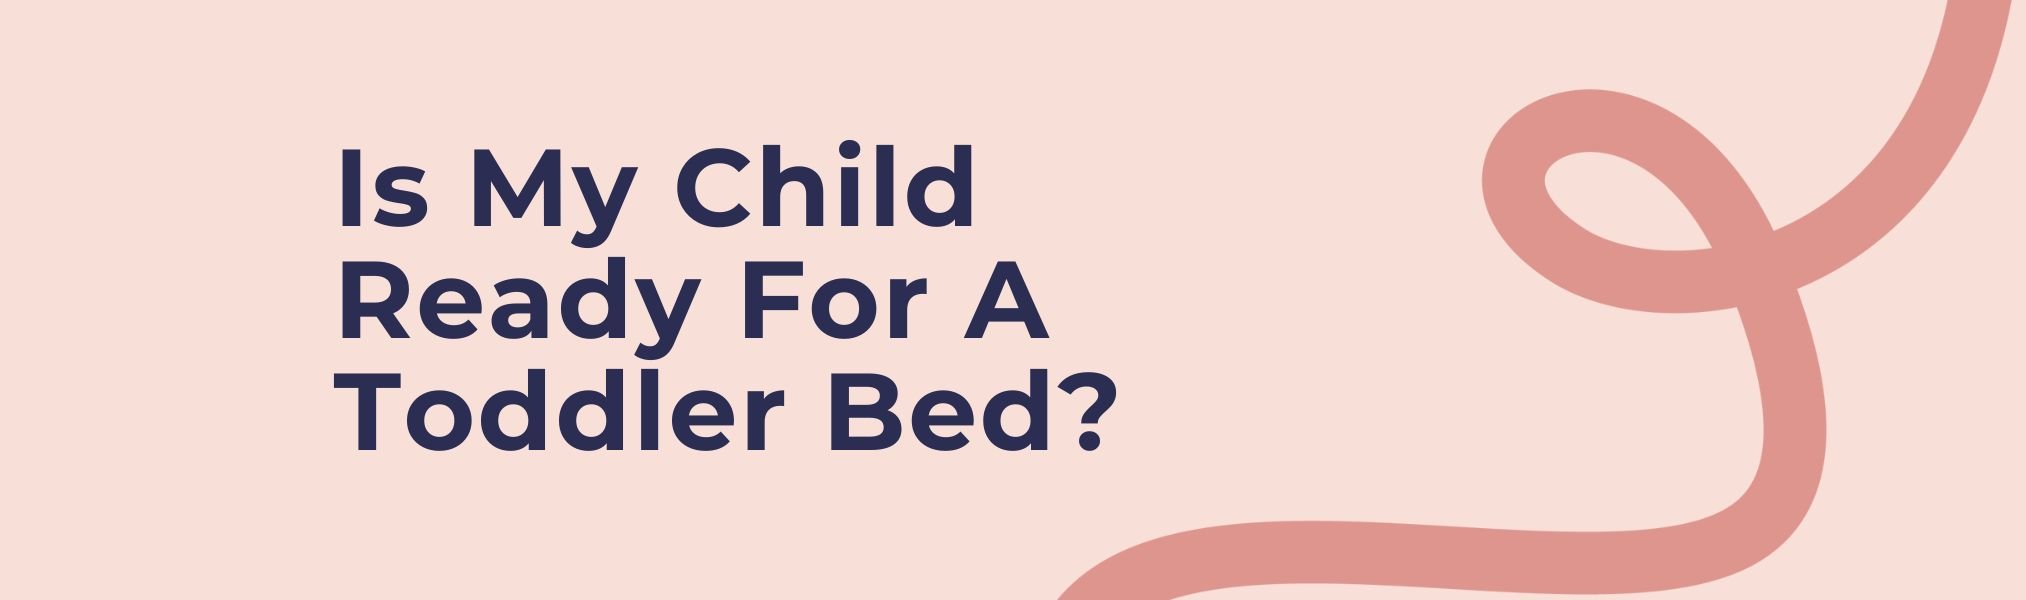 Is My Child Ready For A Toddler Bed?